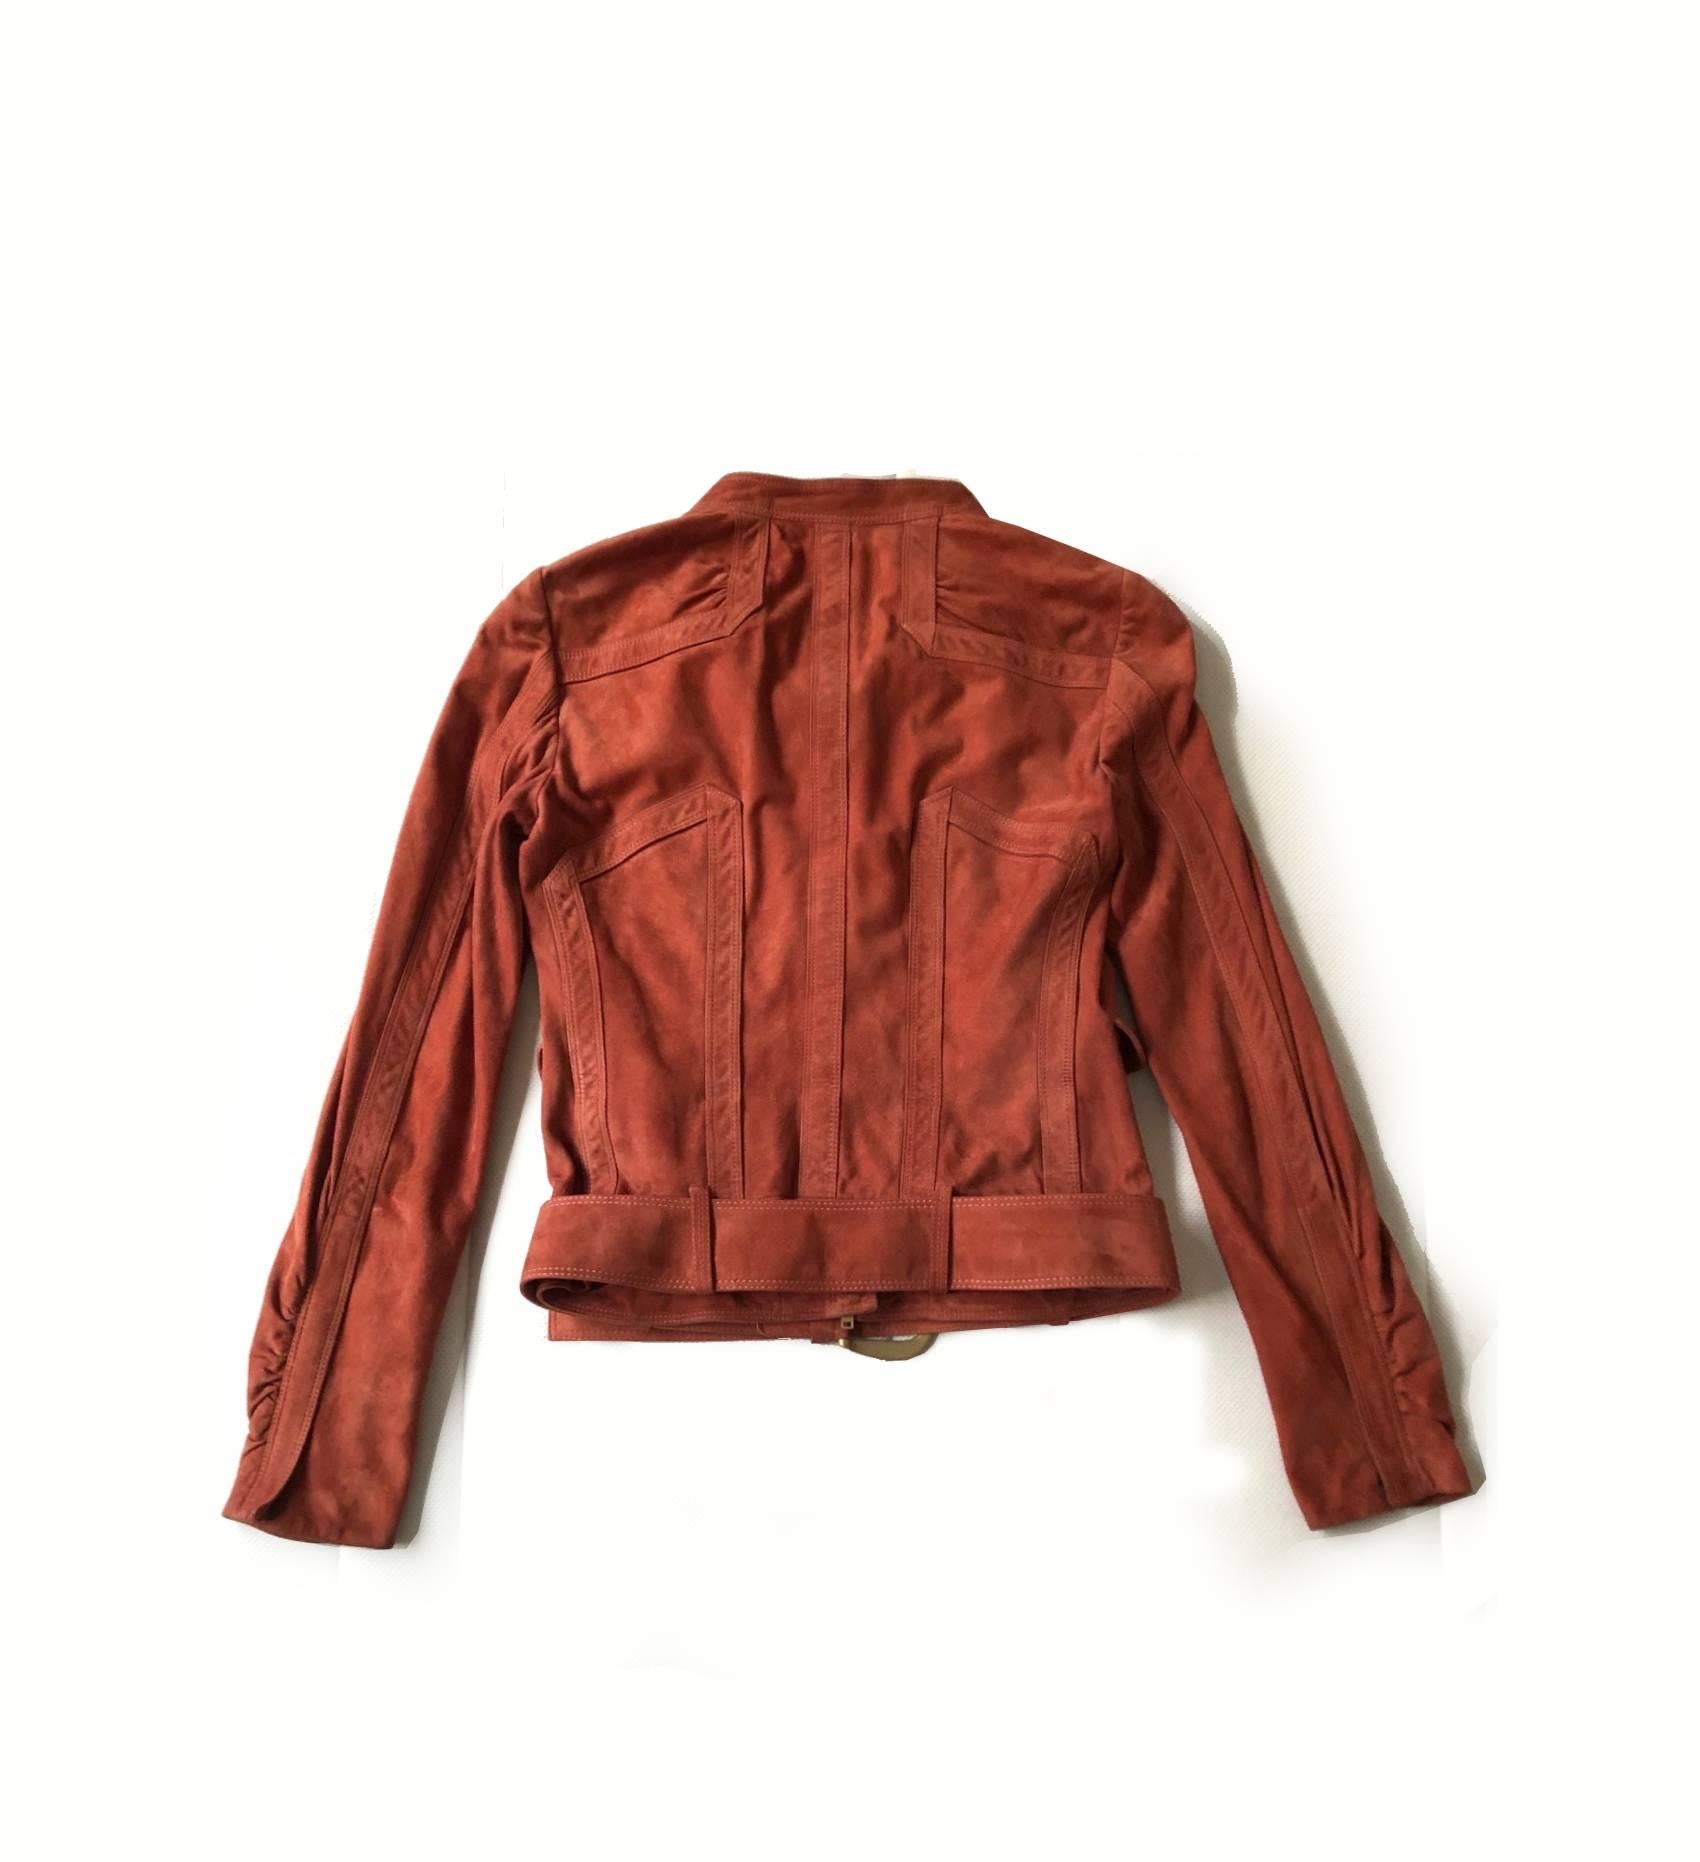 FREE UK and WORLDWIDE DELIVERY 

Gucci suede biker jacket, terracotta lobster orange colour, two front pockets, front zip half way closure, zip closure detail on both sleeves, bottom belt, gold tone metal-ware

Size: Small, 40 Italian, 8 UK, 0-2 USA